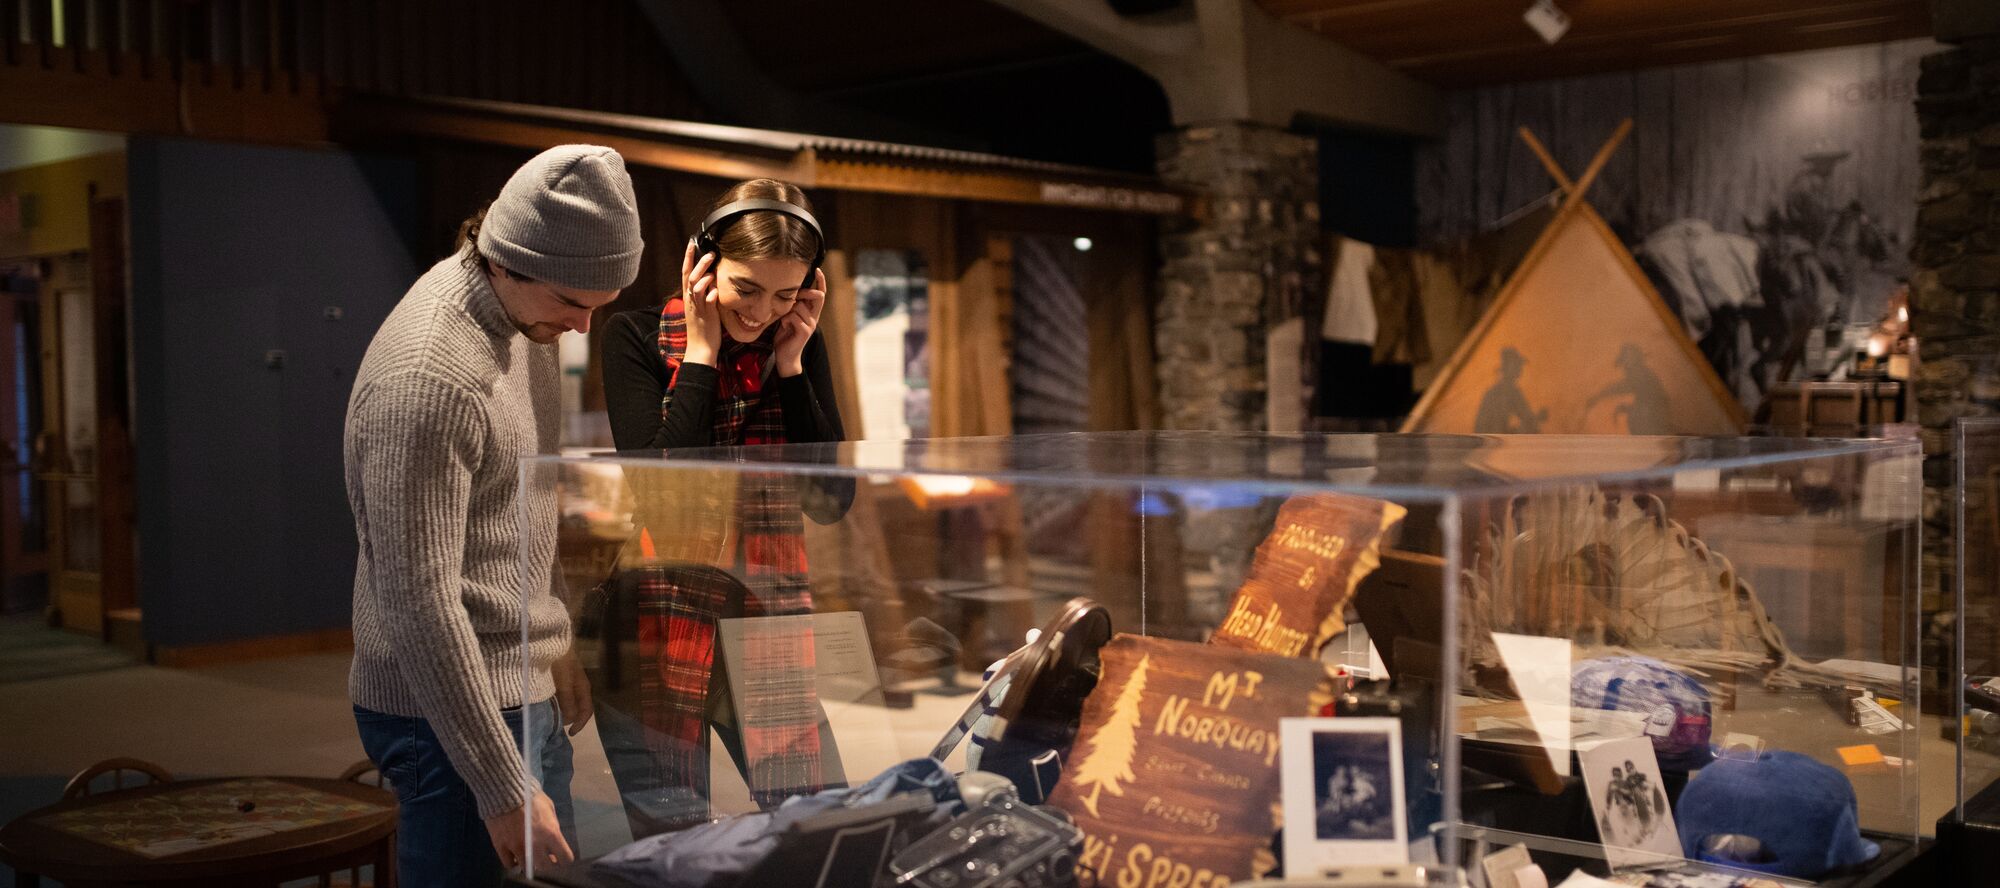 Couple looking at displays at the Whyte Museum.